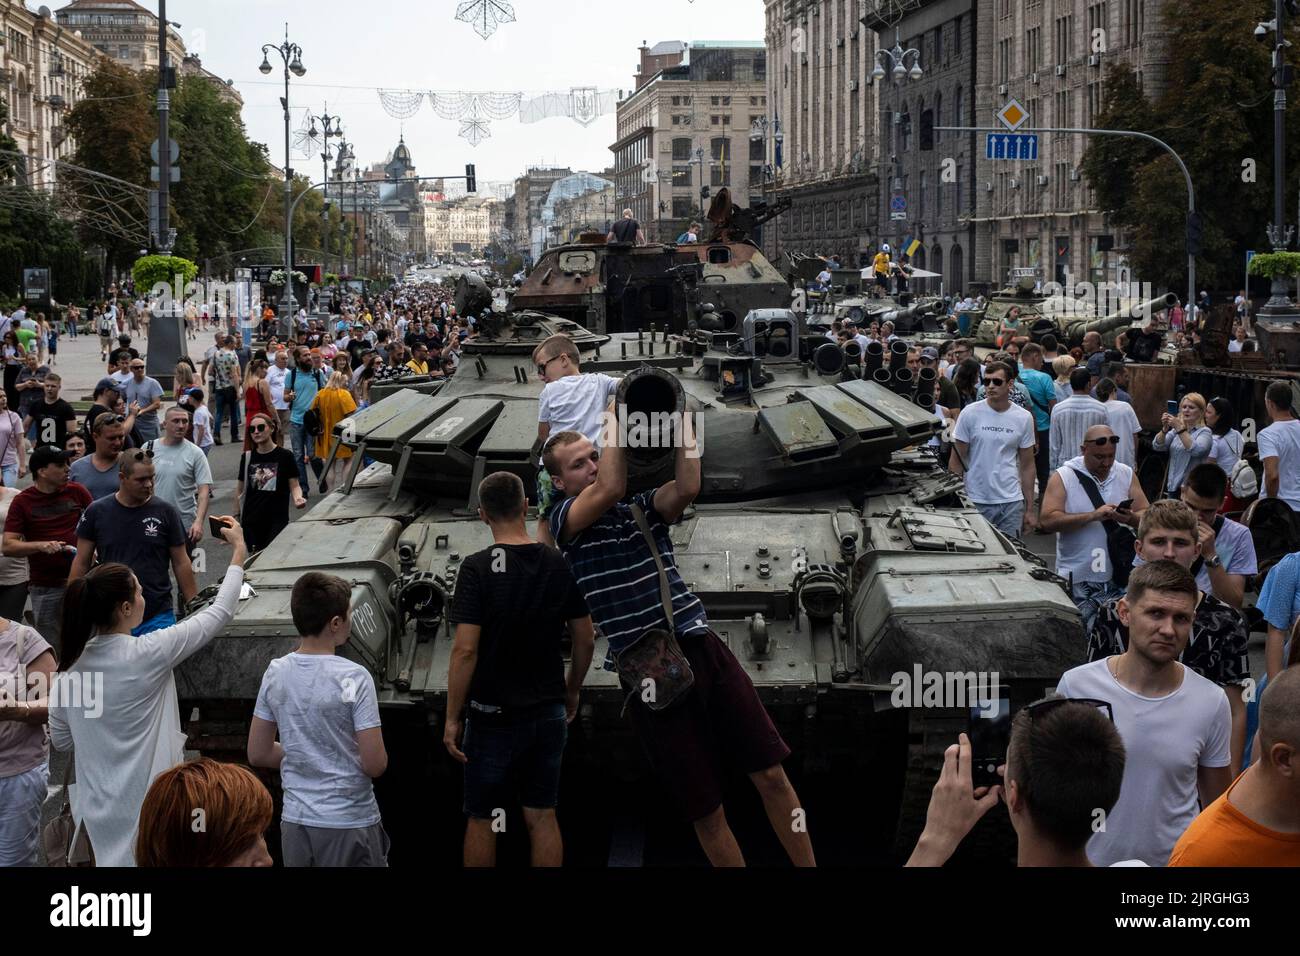 Kyiv, Kyiv Oblast, Ukraine. 21st Aug, 2022. A view of citizens flocked to see the destroyed Russian military equipment and tanks showcased on the streets of Kyiv. As dedicated to the upcoming Independence Day of Ukraine, and nearly 6 months after the full-scale invasion of Ukraine on February 24, the country's capital Kyiv holds an exhibition on the main street of Khreschaytk Street showing multiple destroyed military equipment, tanks and weapons from The Armed Forces of The Russian Federation (AFRF).As the Russian full invasion of Ukraine started on February 24, the war that has killed nume Stock Photo